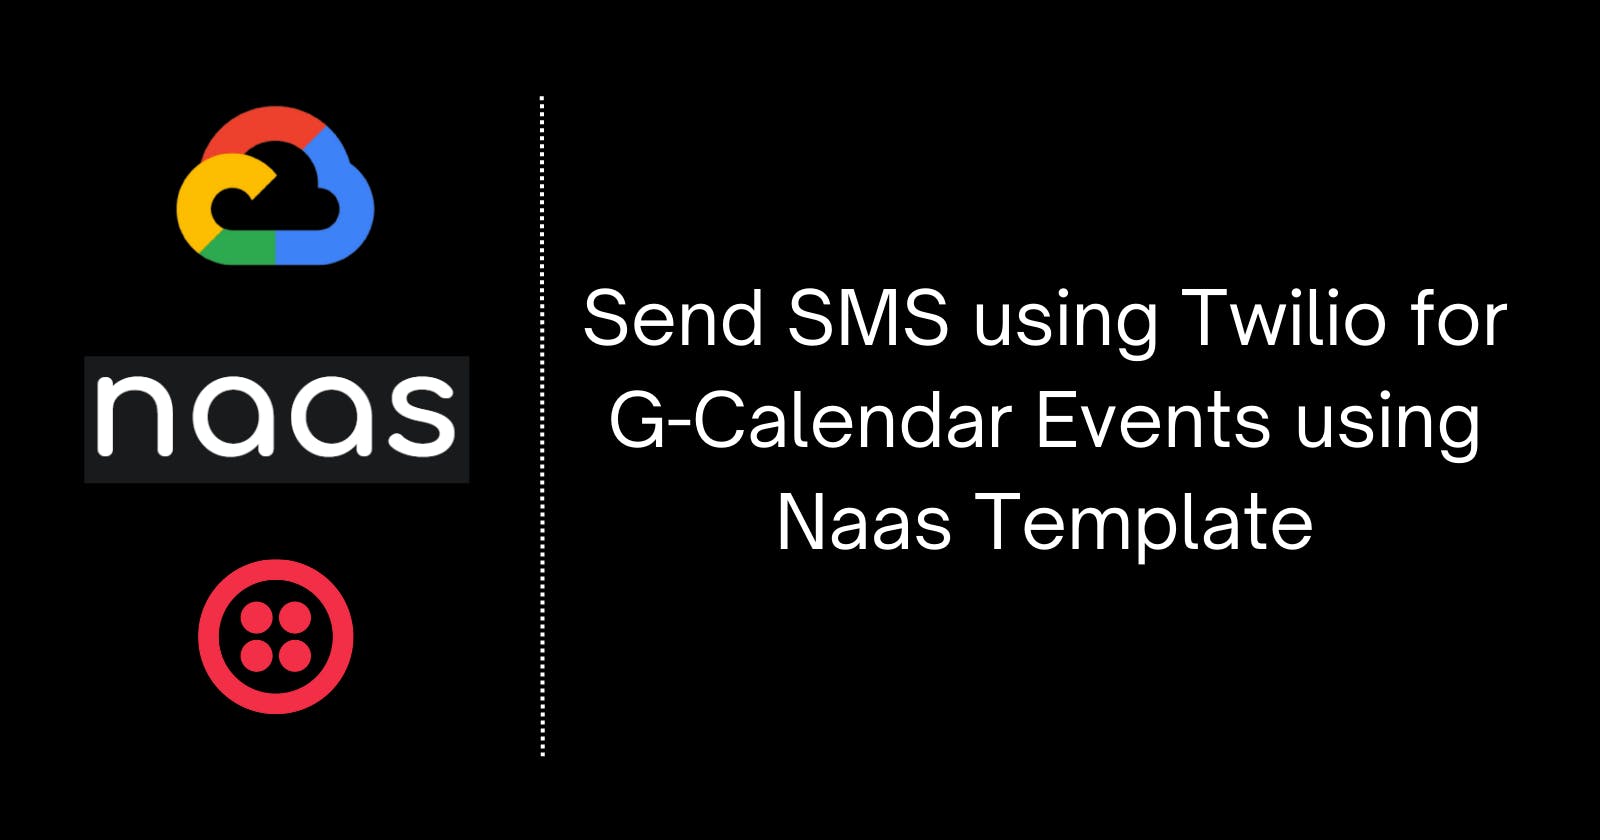 Send SMS using Twilio for G-Calendar Events using Naas Template